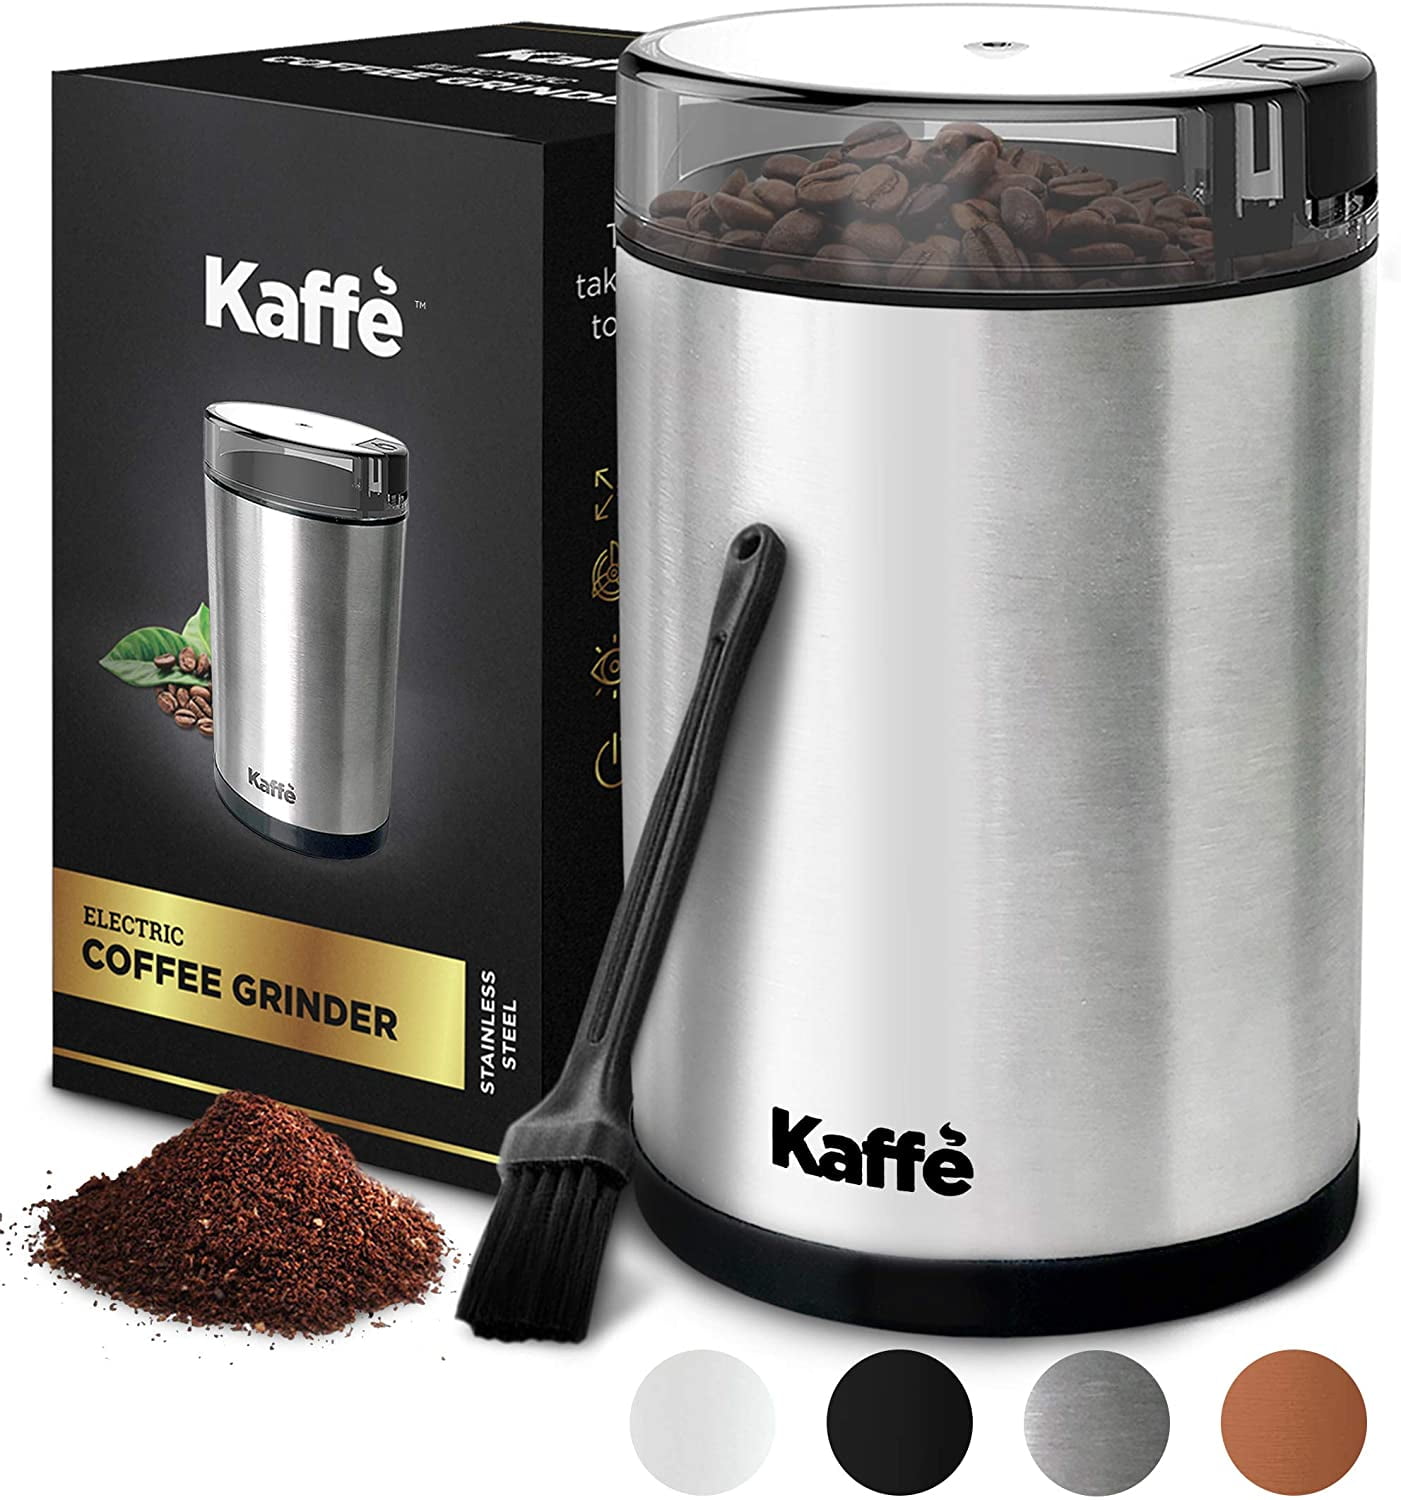  Kaffe Coffee Grinder Electric. Best Coffee Grinders for Home  Use. (14 Cup) Easy On/Off w/Cleaning Brush Included. Copper: Home & Kitchen